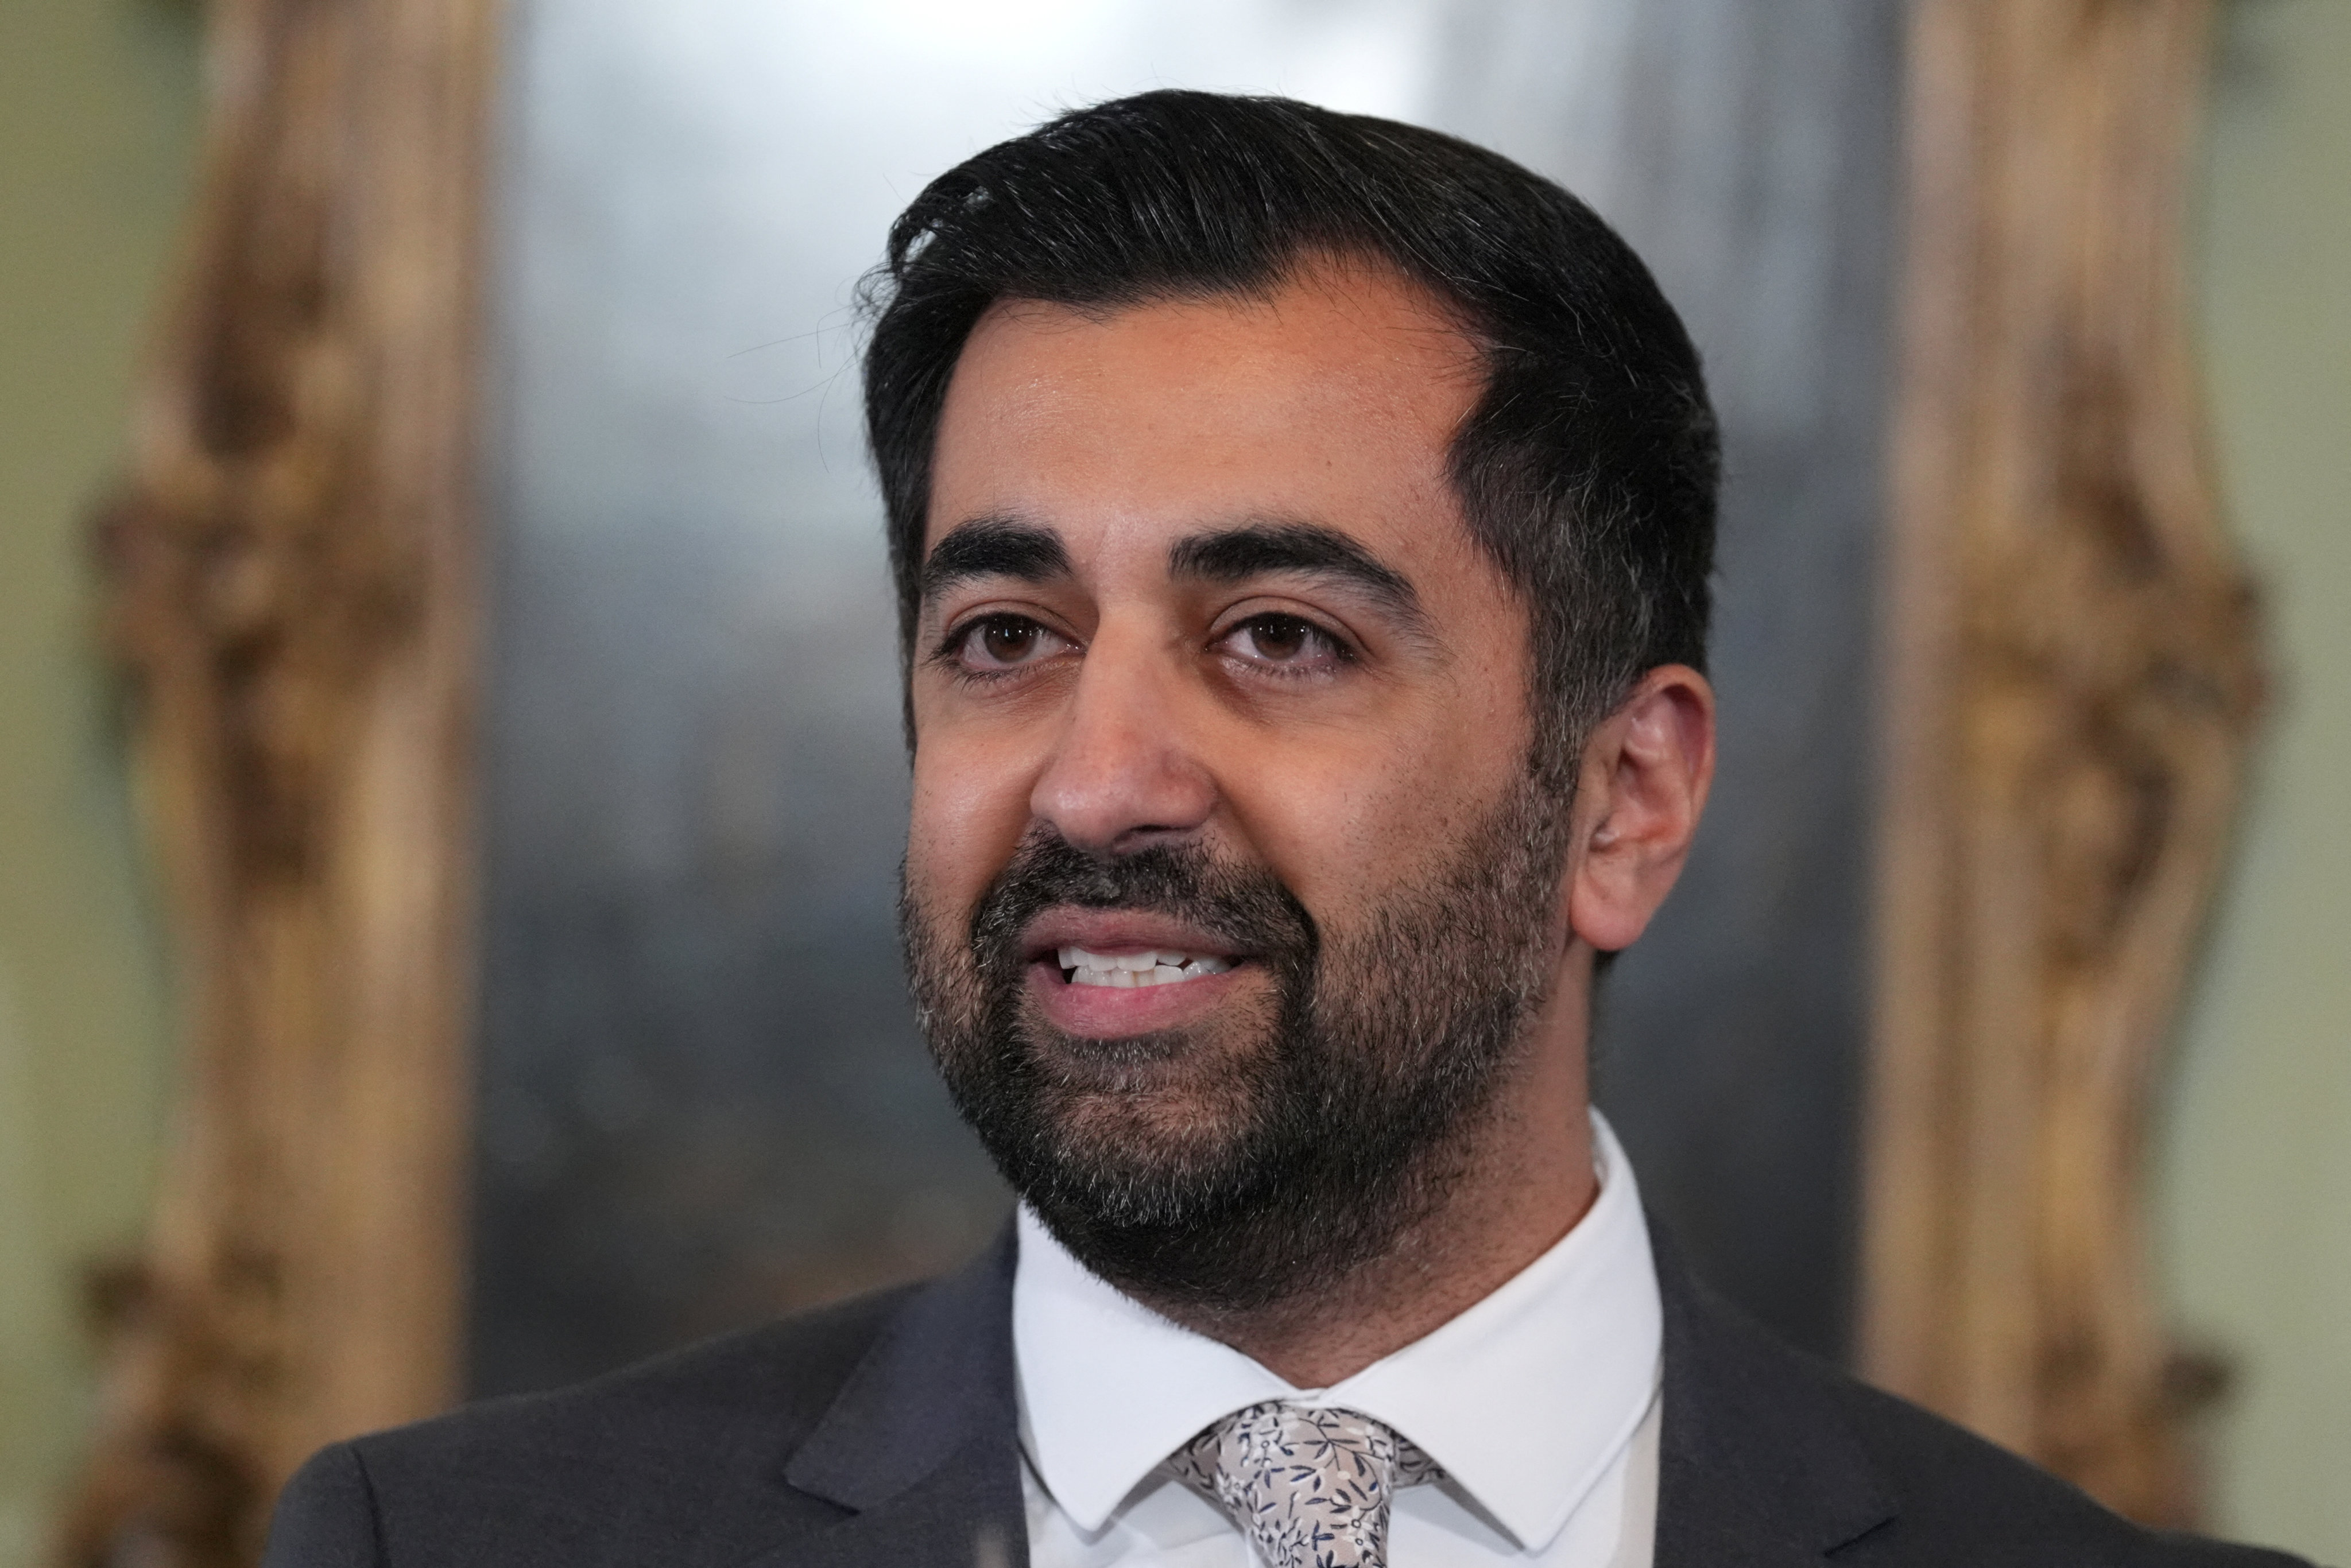 Scotland’s First Minister Humza Yousaf speaks during a press conference at Bute House, his official residence where he said he will resign as SNP leader and Scotland’s First Minister. Photo: Pool via Reuters